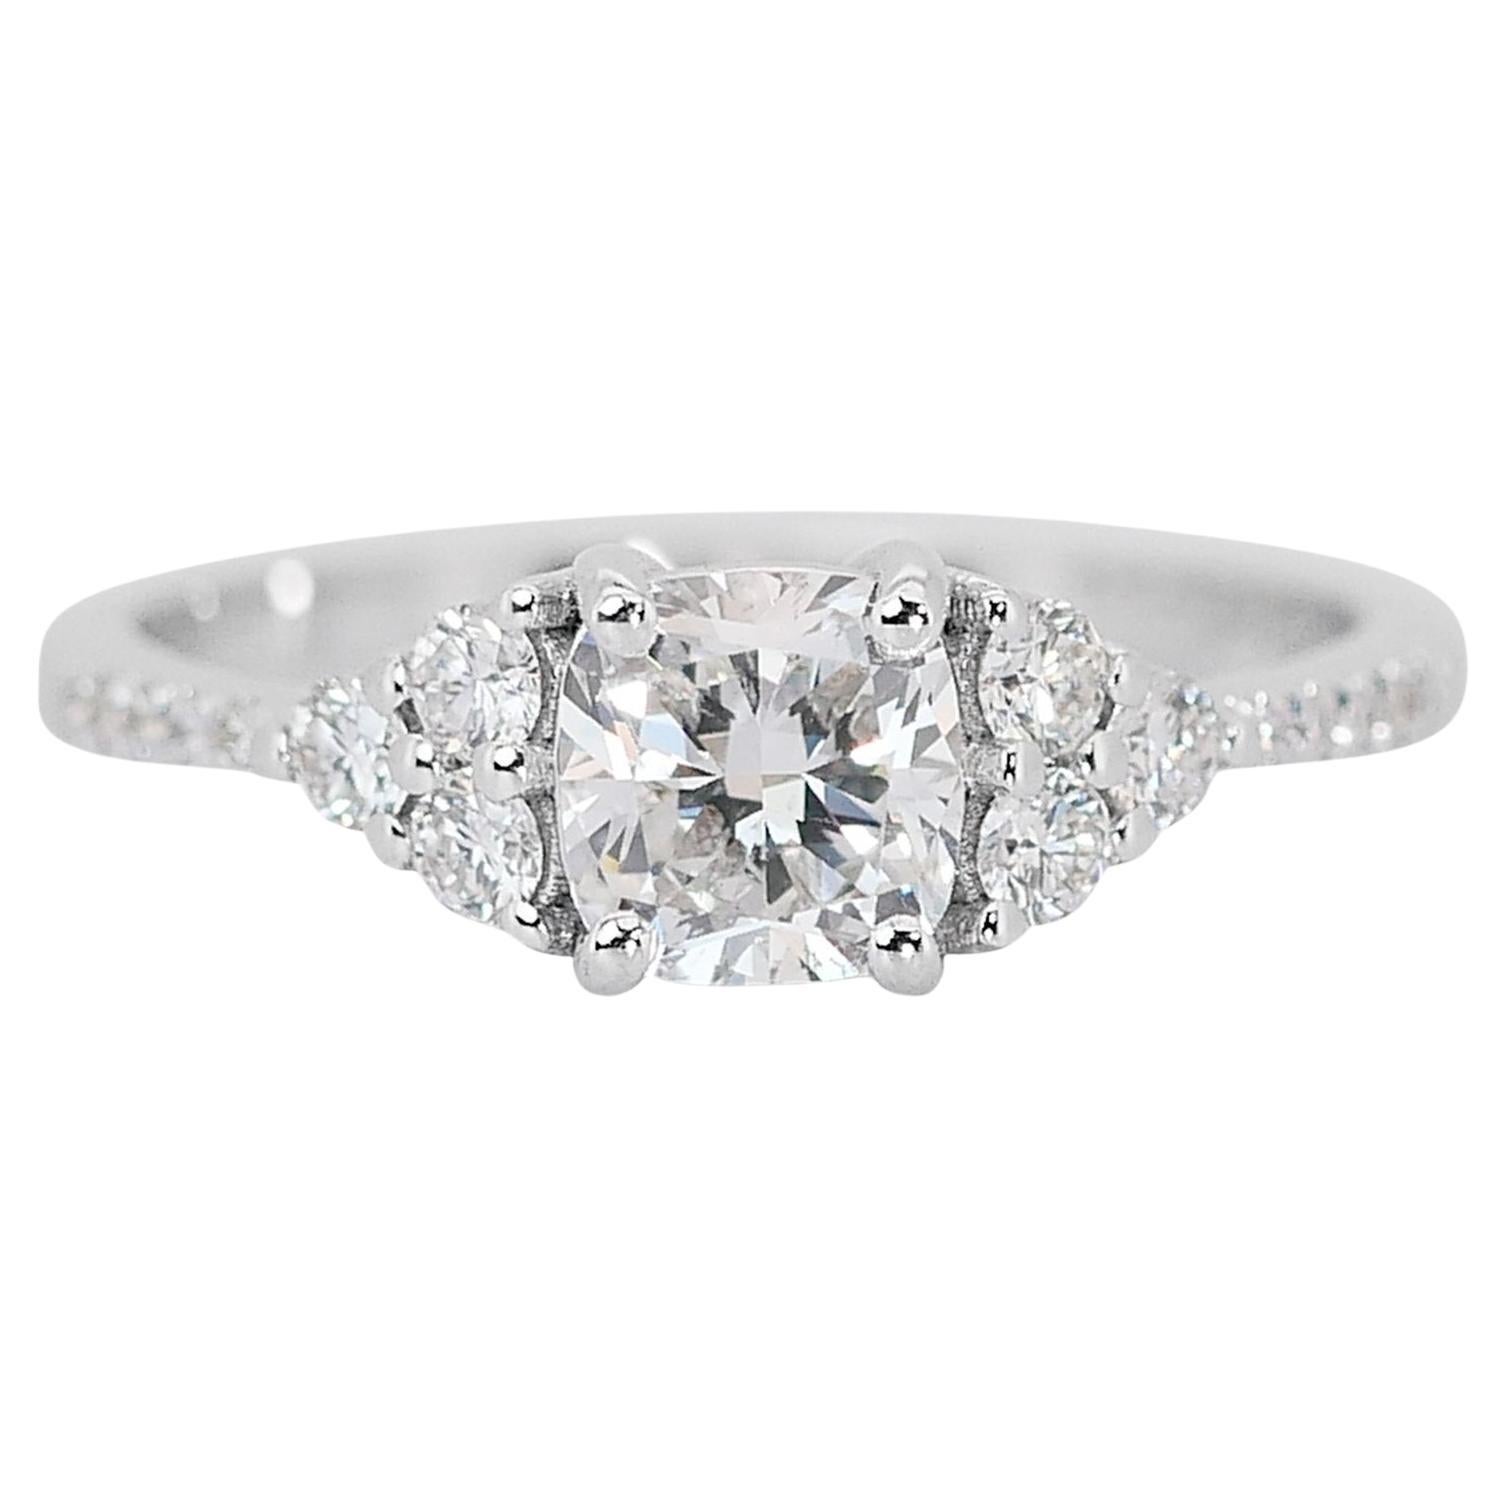 Magnificent 1.30ct Diamonds Pave Ring in 14k White Gold - GIA Certified For Sale